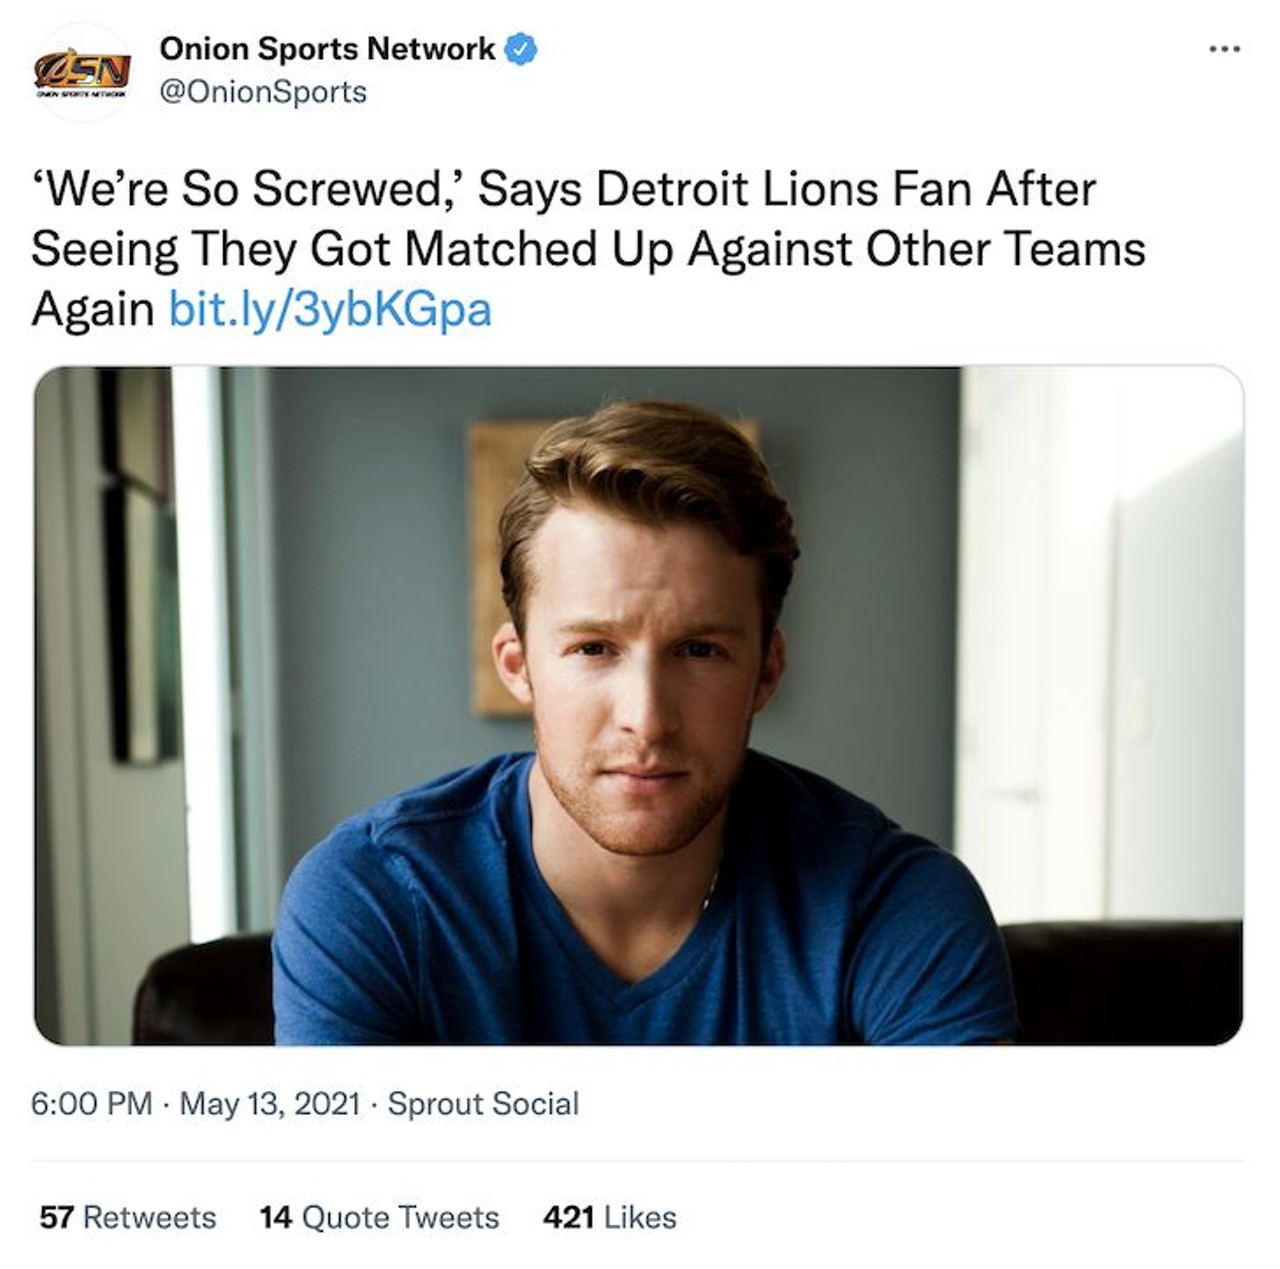 &#145;We&#146;re So Screwed,&#146; Says Detroit Lions Fan After Seeing They Got Matched Up Against Other Teams Again
Taking a hit at Detroit's infamous football team, The Onion &#147;cites&#148; a Detroit Lions fan, complaining about how they&#146;ll actually compete against other teams each week, exclaiming how unfair back-to-back matches are&#133; as if every other NFL team isn&#146;t doing the same thing.